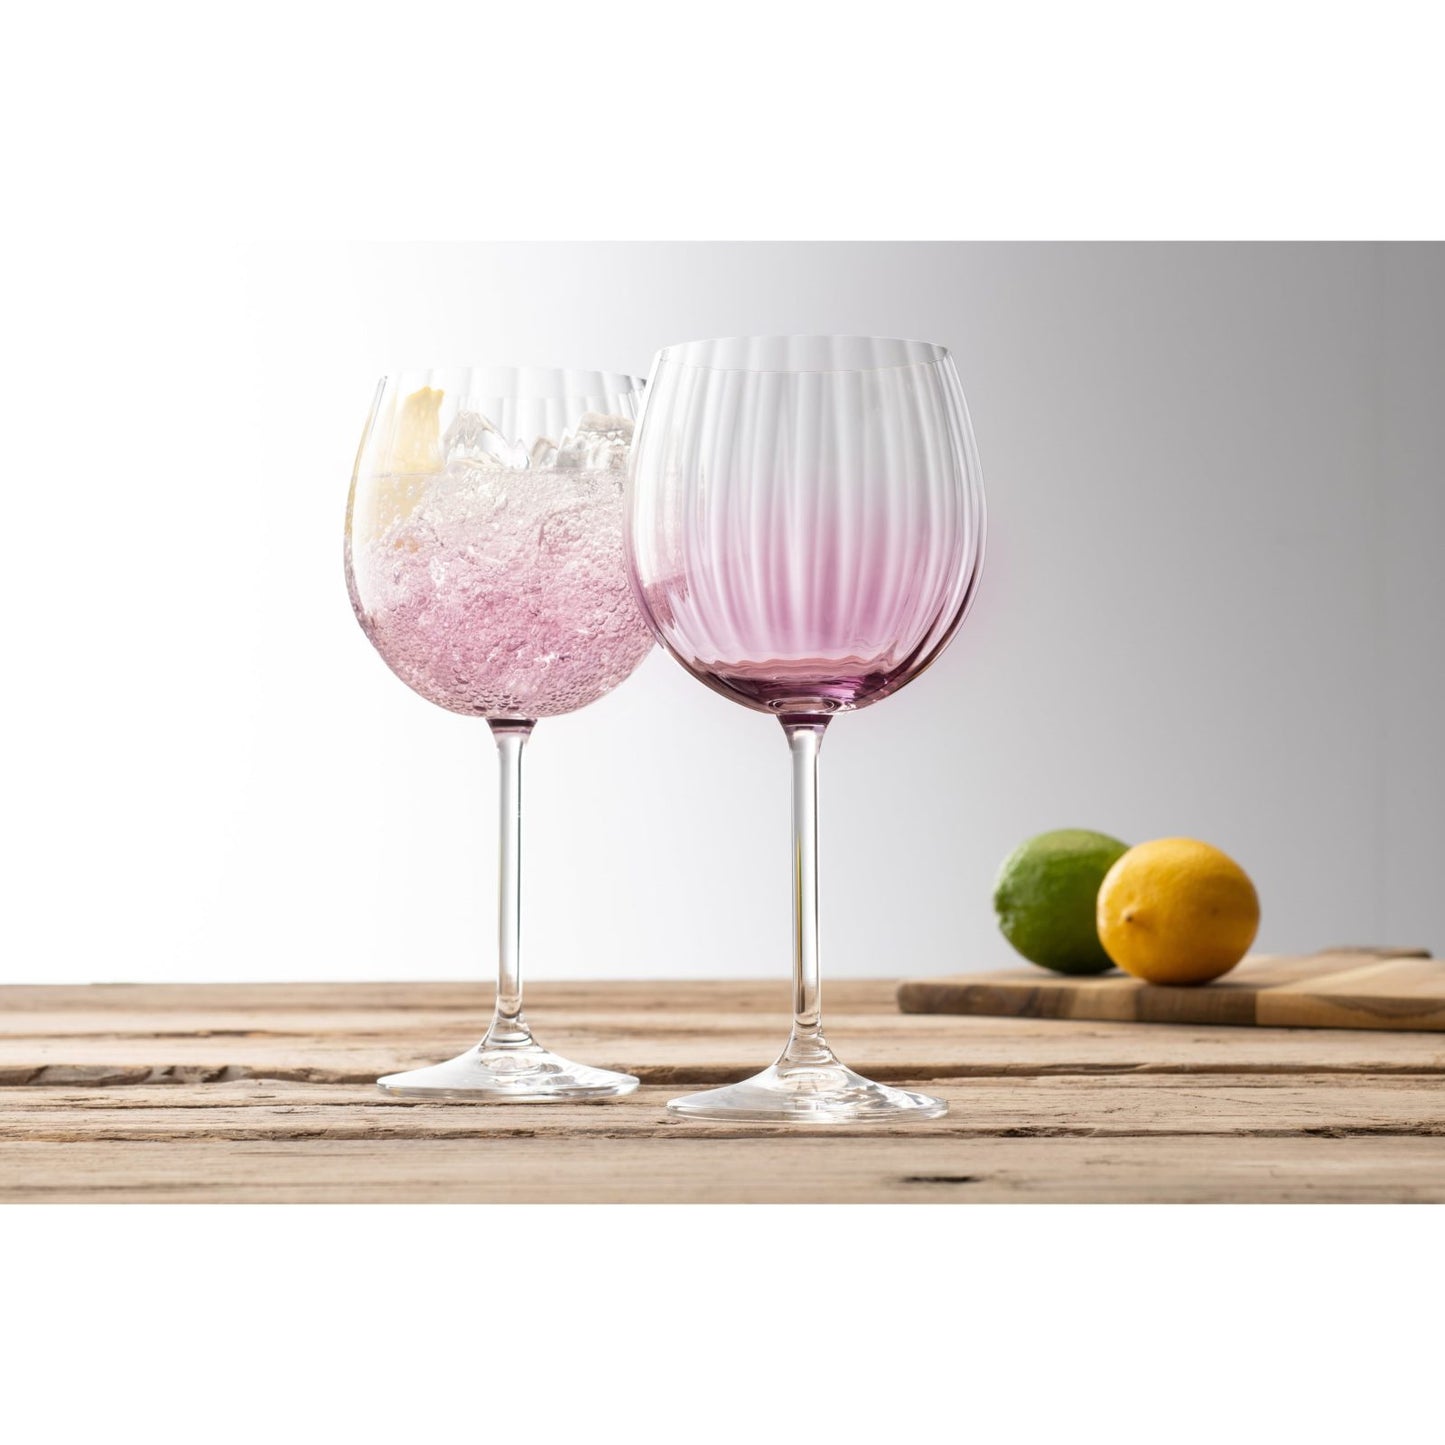 Erne Gin & Tonic set of 2 in Amethyst